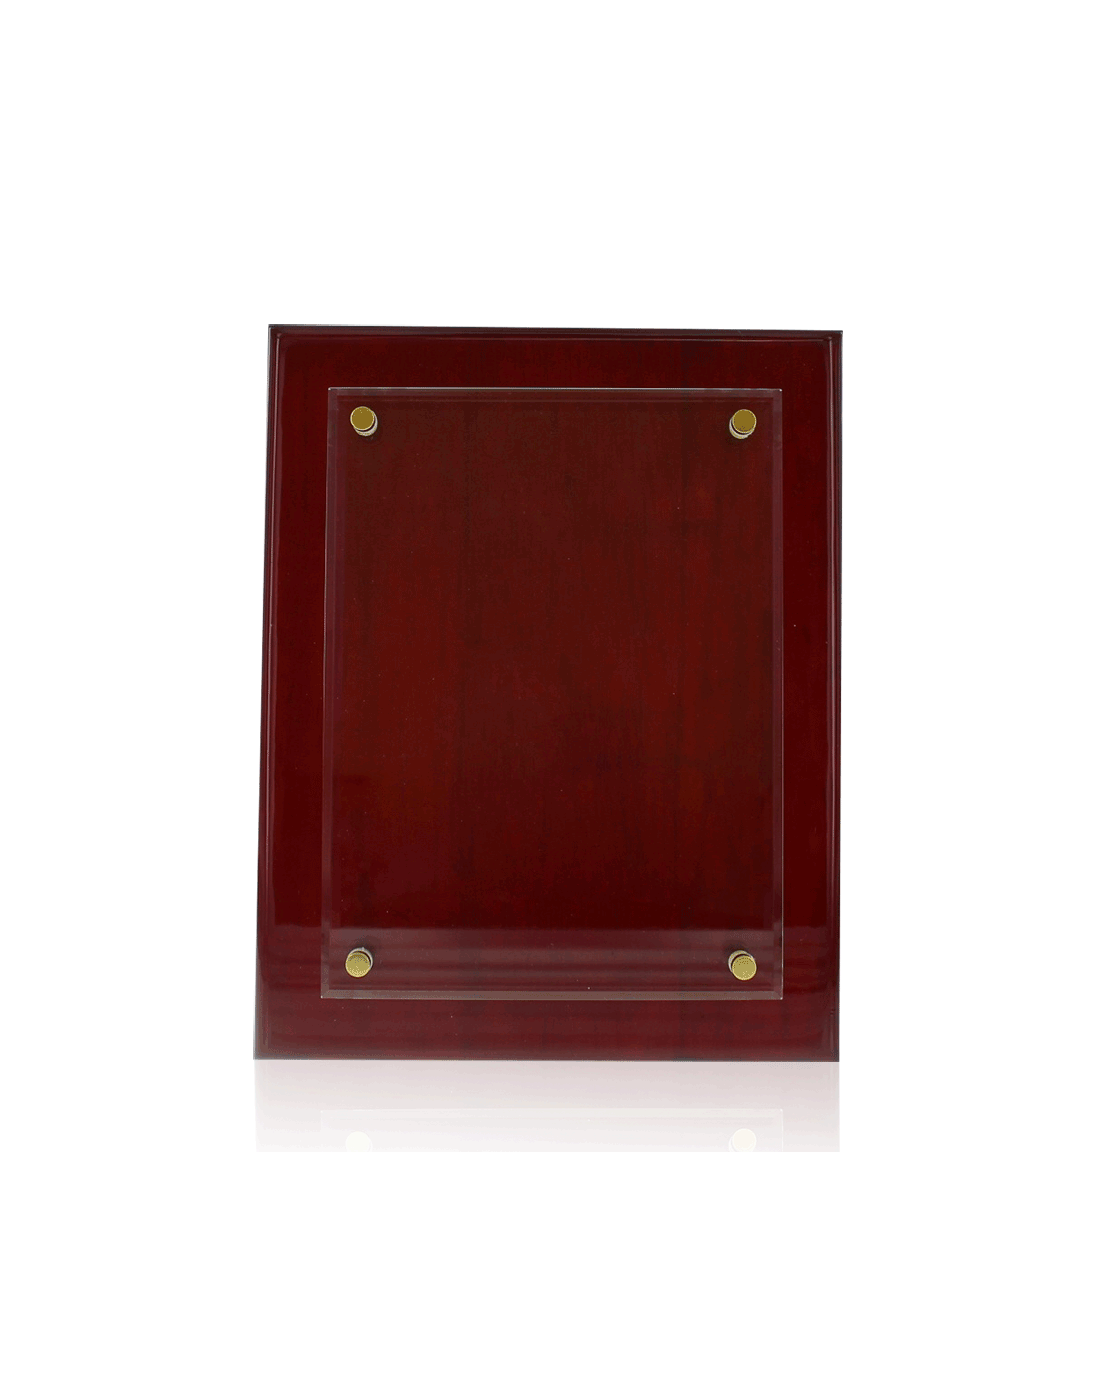 Rosewood Piano Finish Wall Plaque